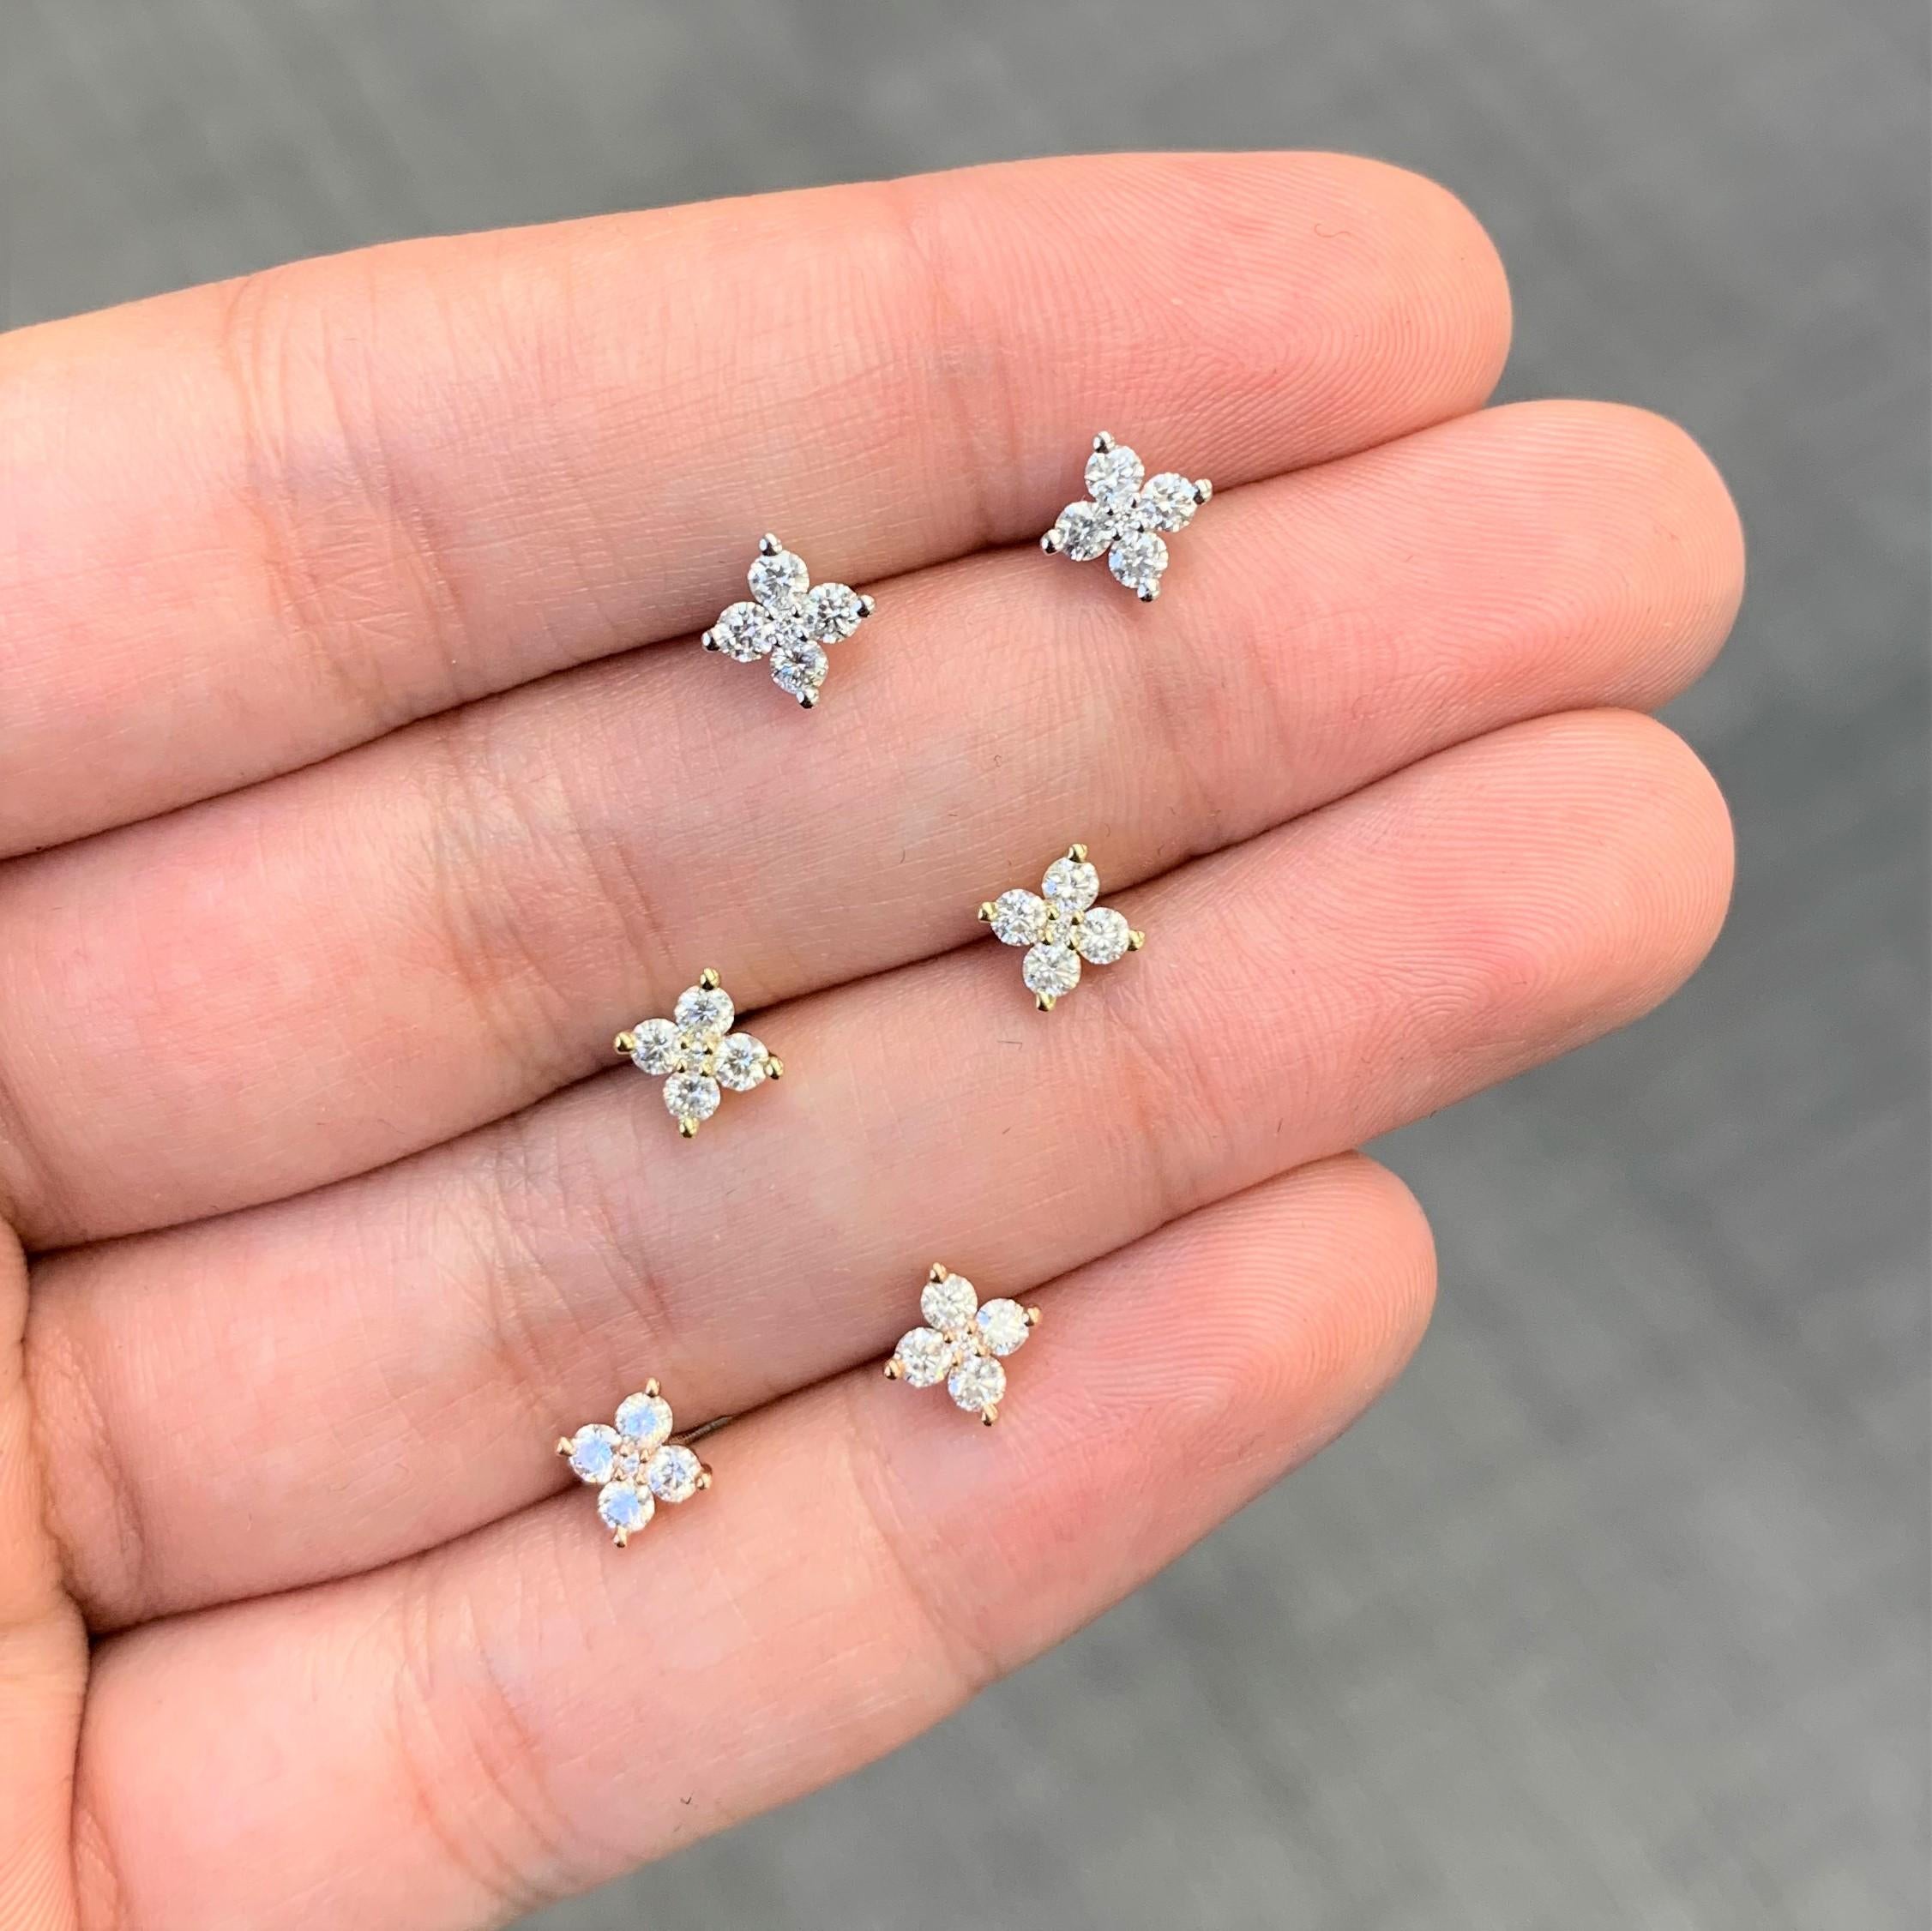 Quality Earrings Set: Made from real 14k gold and 10 round diamonds on each earring approximately 0.32 ct; Diamond Color & Clarity is GH-SI Certified diamonds with a butterfly push-backs for closure
 Surprise Your Loved Ones with Our Cluster Diamond